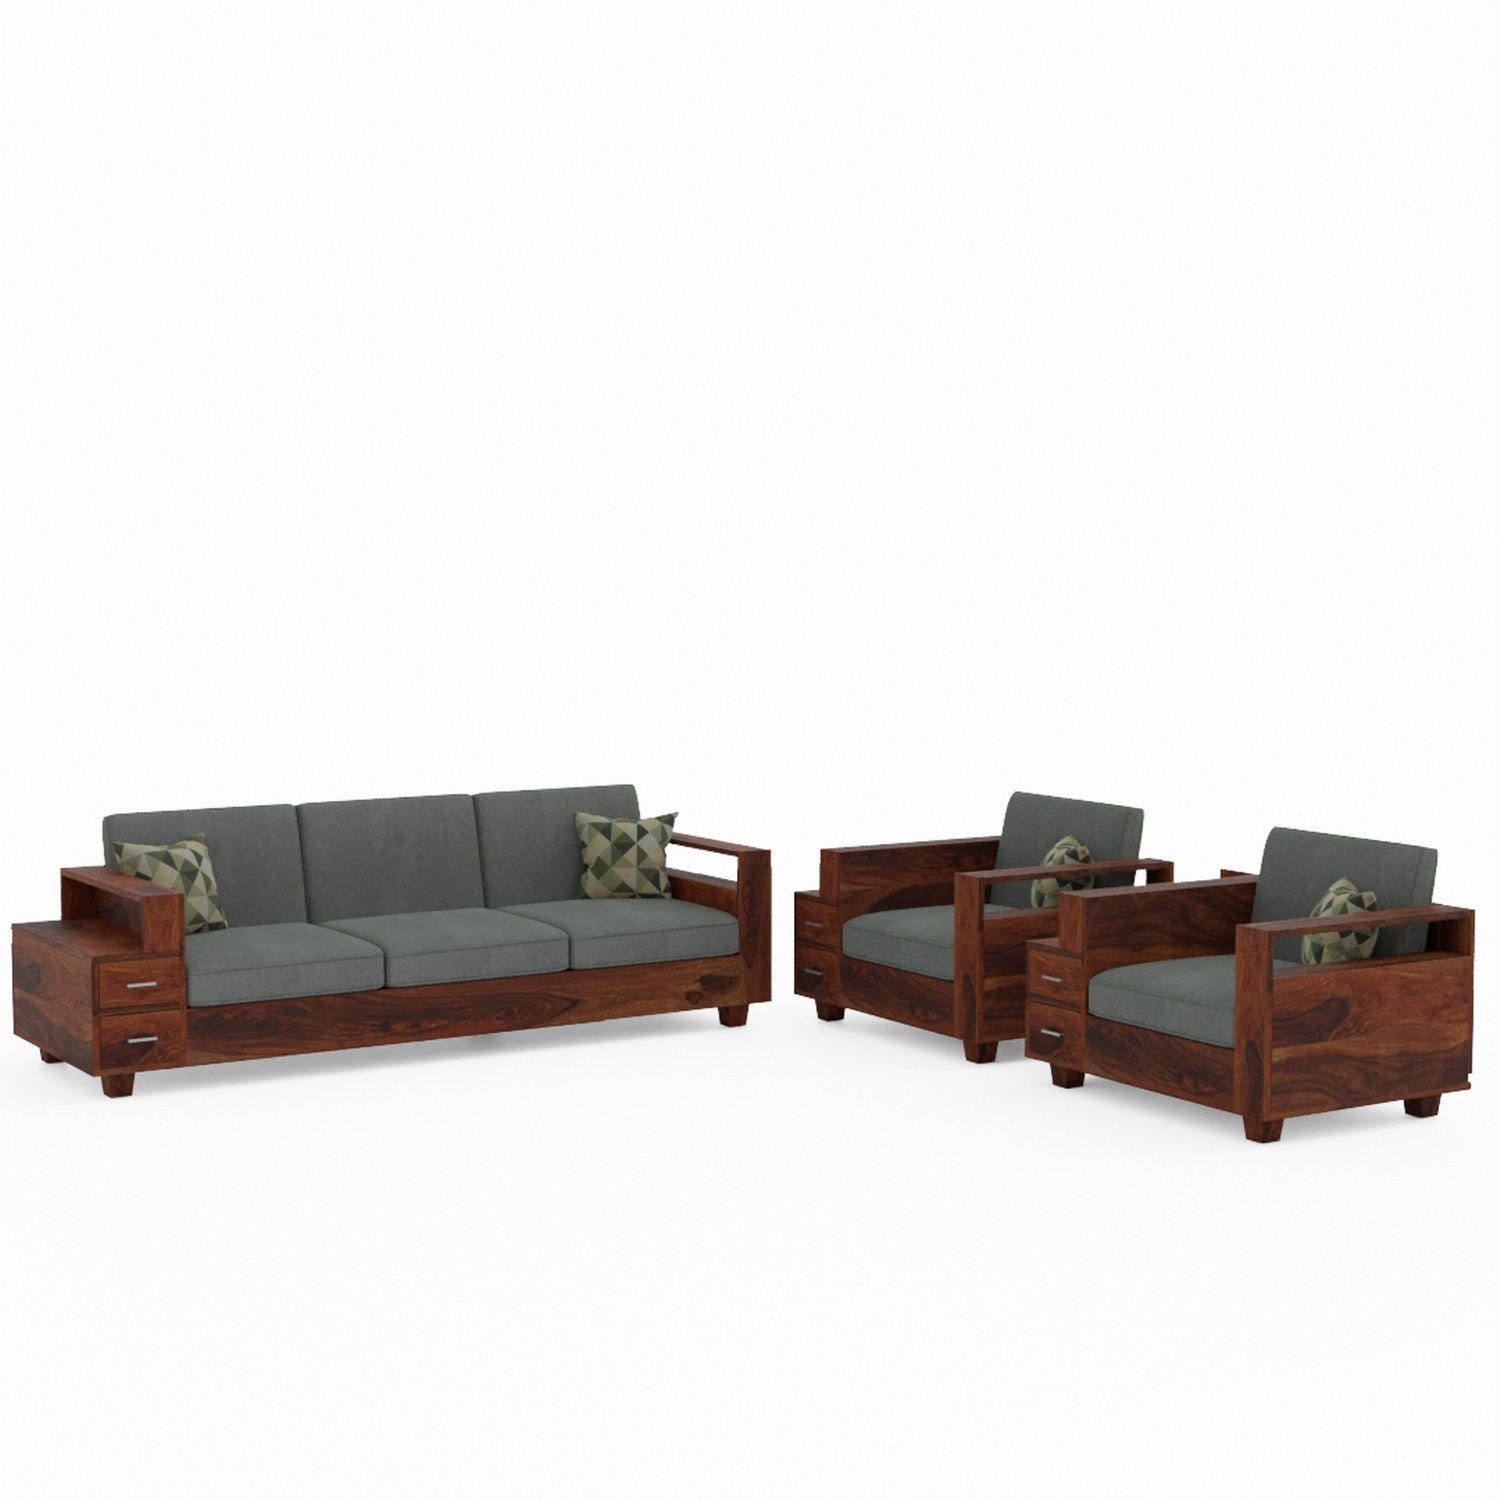 Woodora Solid Sheesham Wood 5 Seater Sofa Set With Coffee Table (3+1+1, Natural Finish)